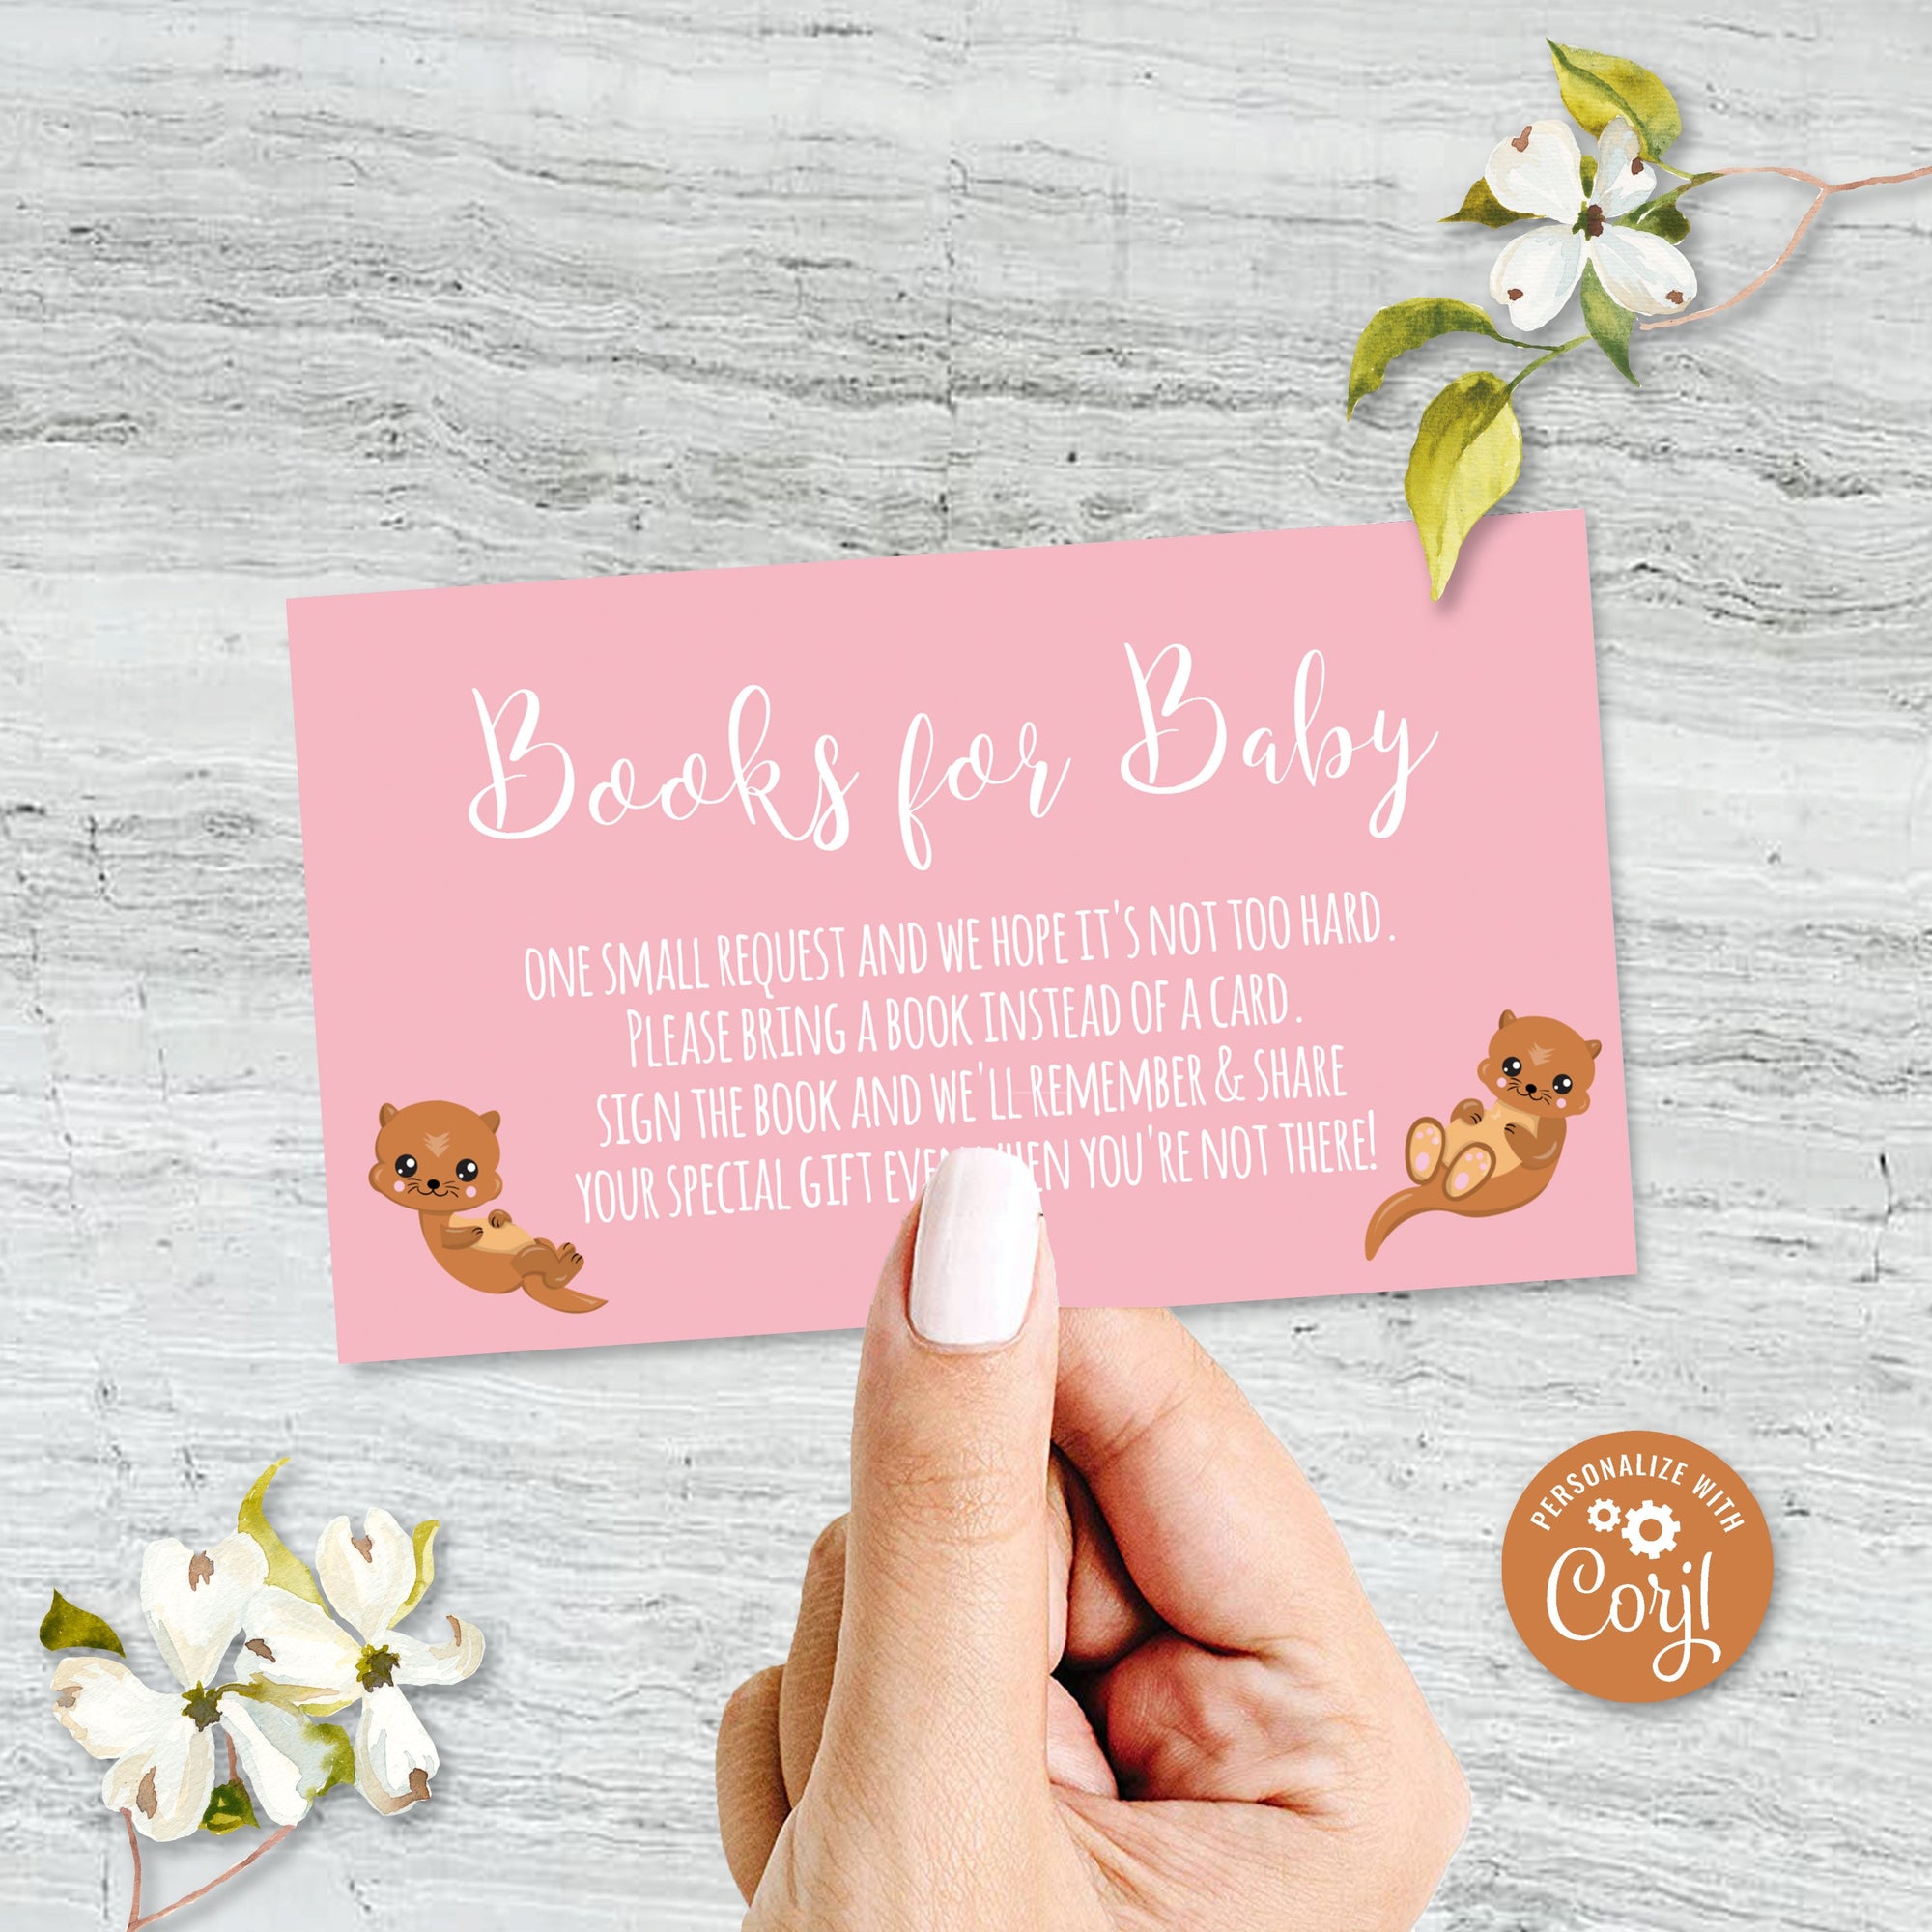 Girls Baby Shower Ideas, Otter Baby Shower, Books for Baby Card Insert, Bring a Book instead of a Card, Otter baby Shower Theme Ideas